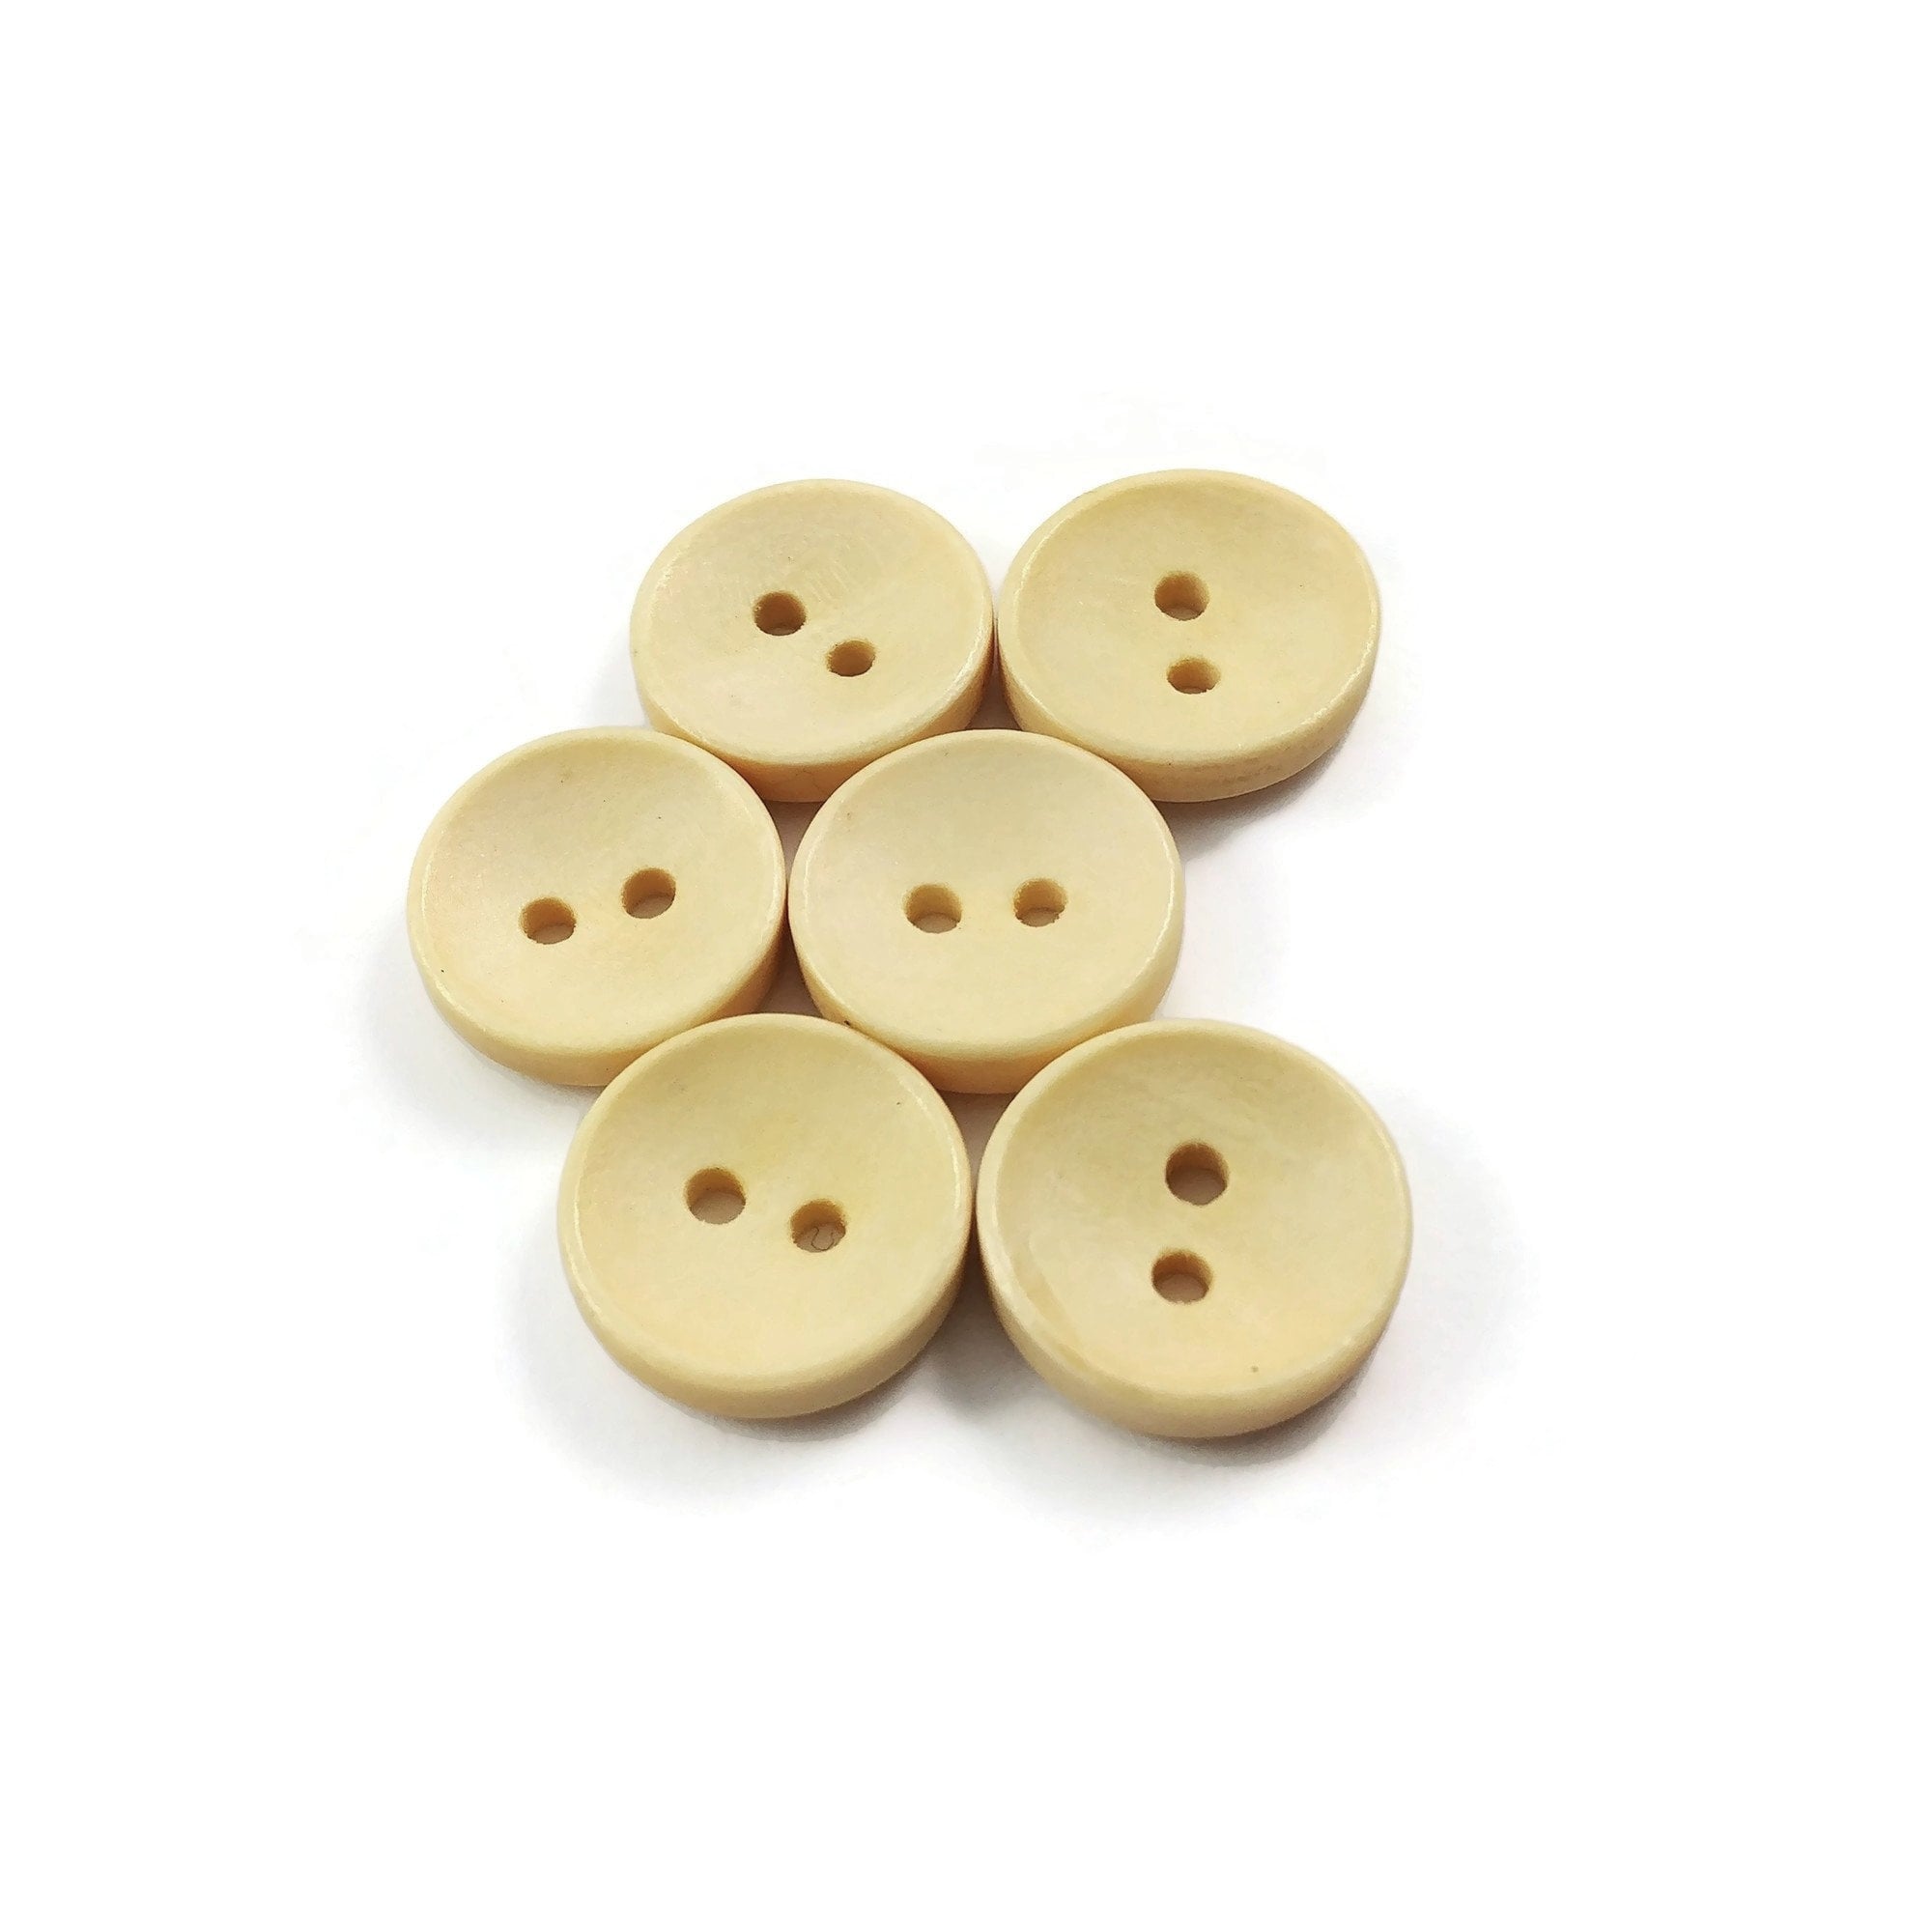 100Pcs Wood Buttons Sewing 2 Holes Round Brown Clothing Accessories 13 15mm  Light Brown 13mm 